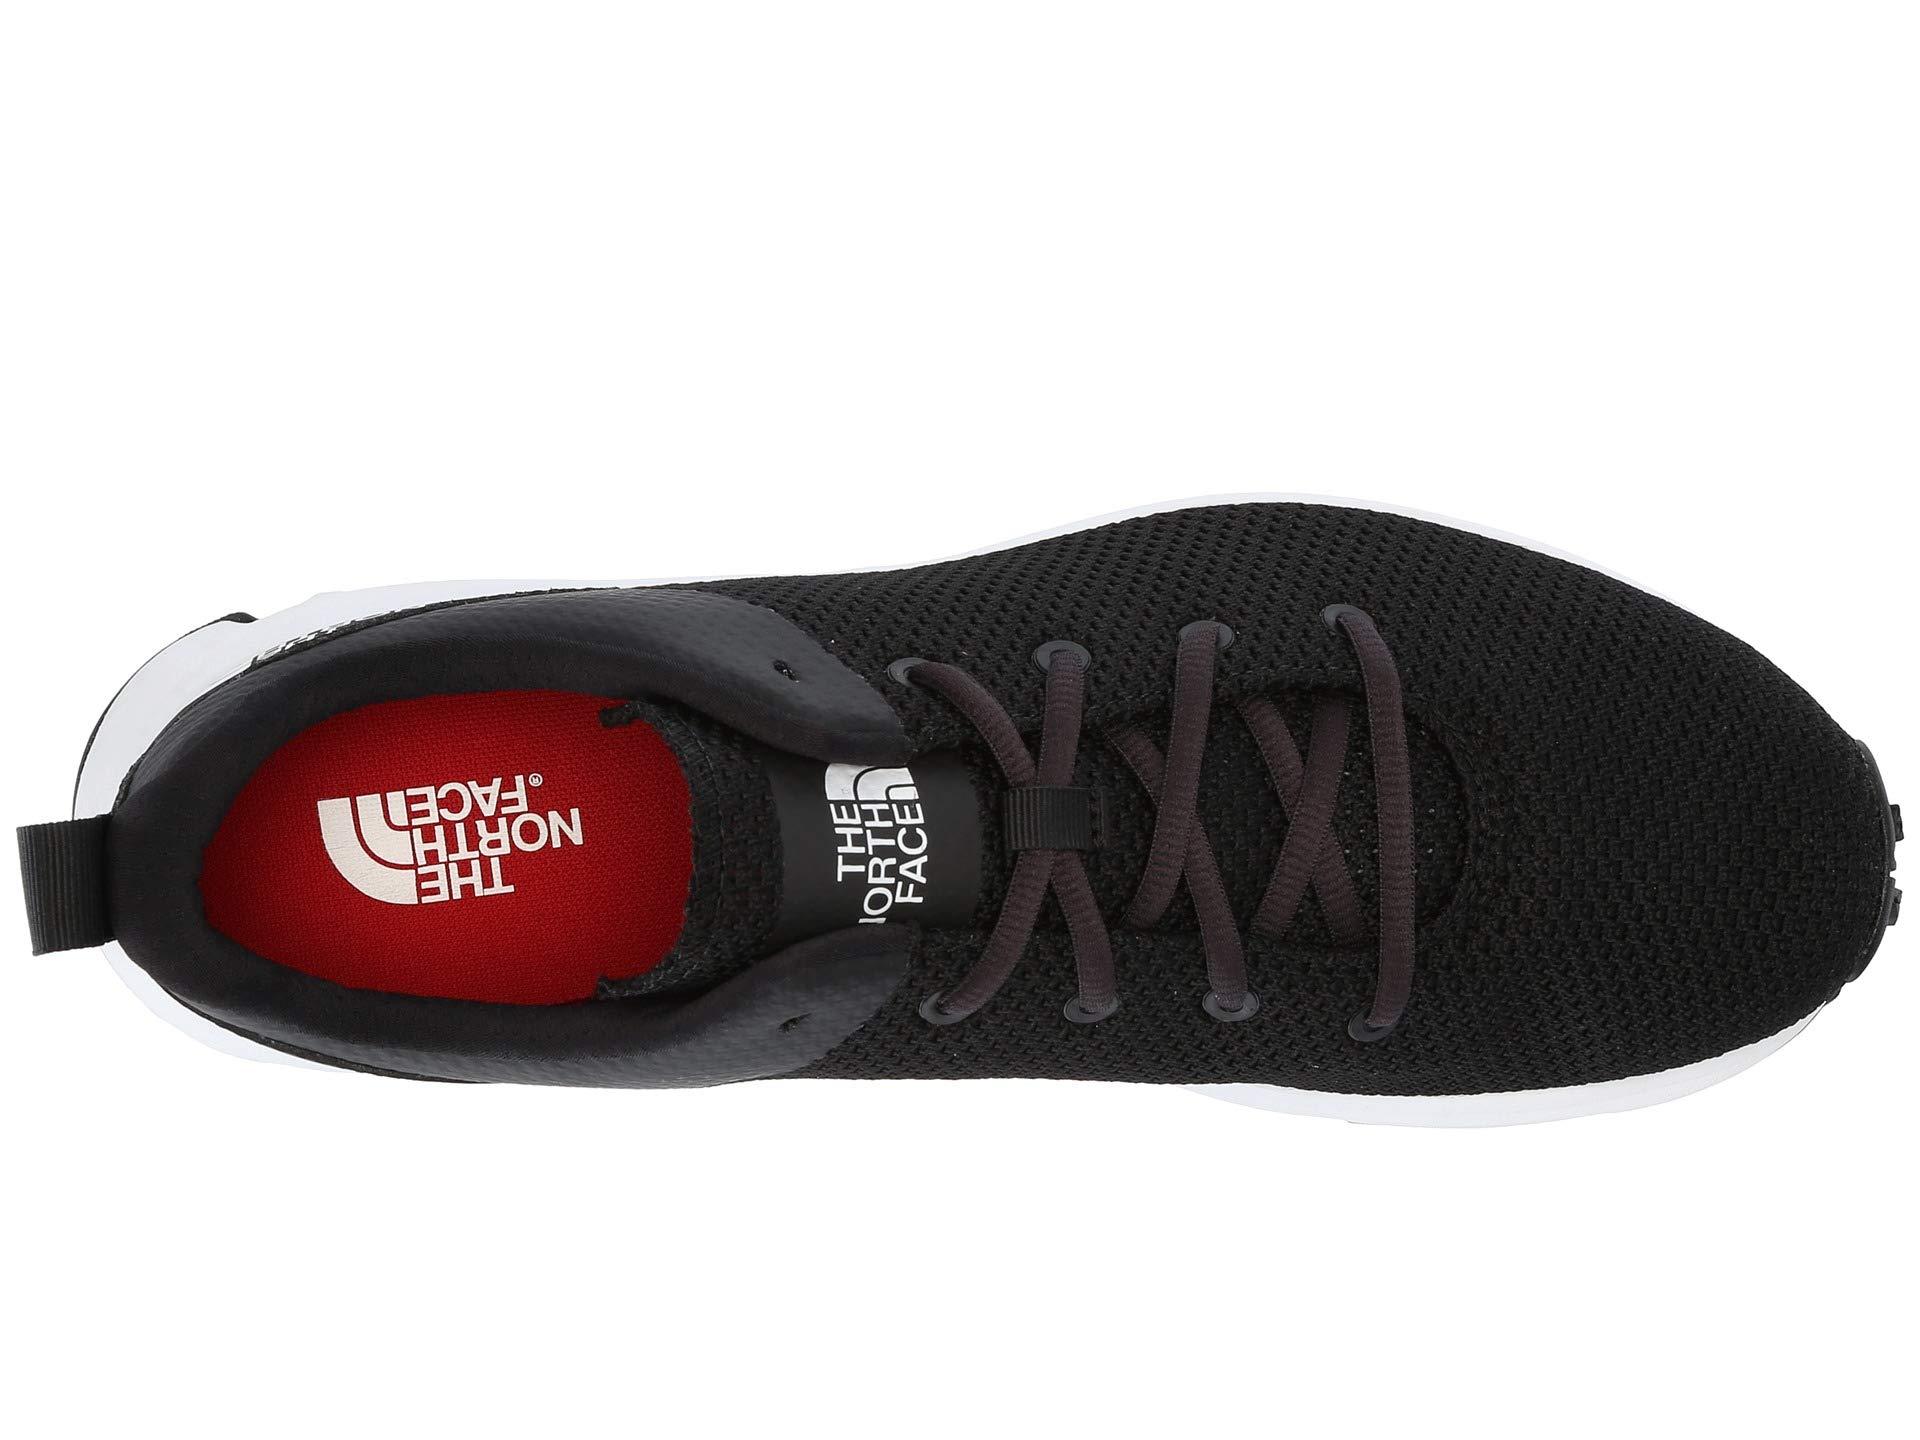 the north face sestriere low